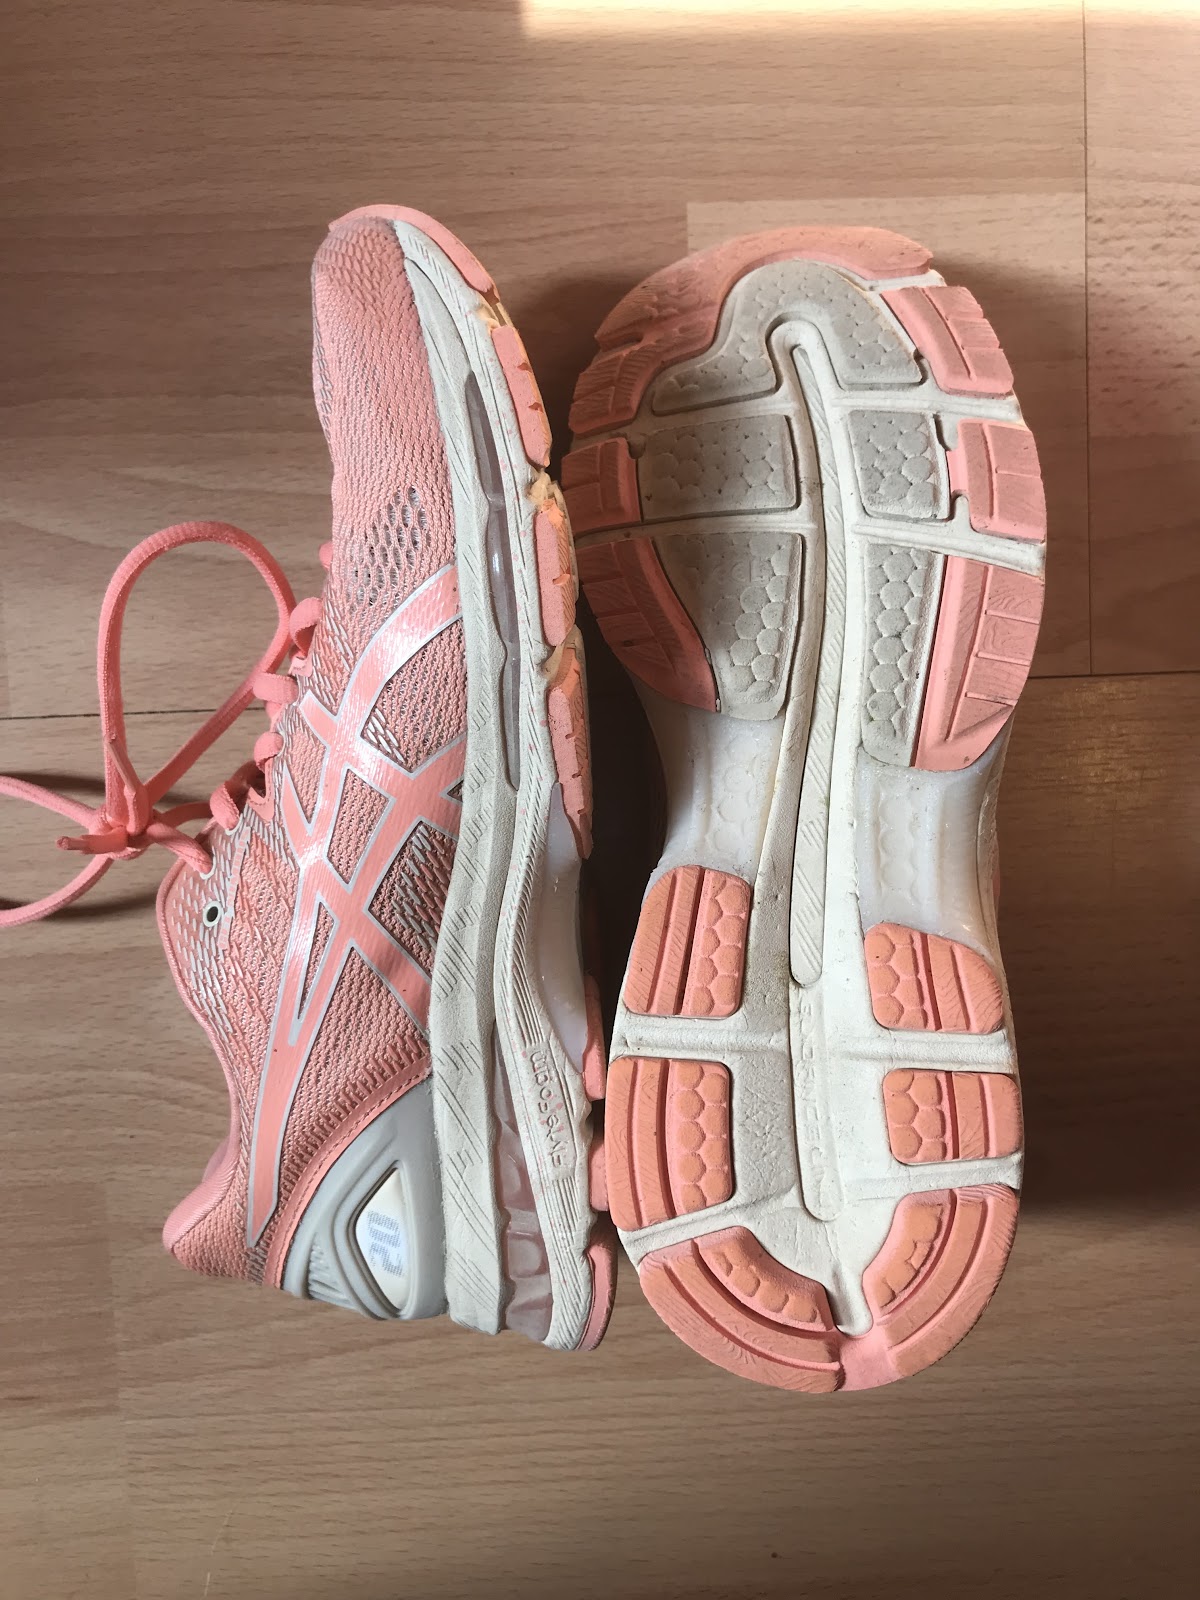 Asics GEL-Nimbus 20: Two decades of innovation, but is it worth it? – Heart  Runner Girl